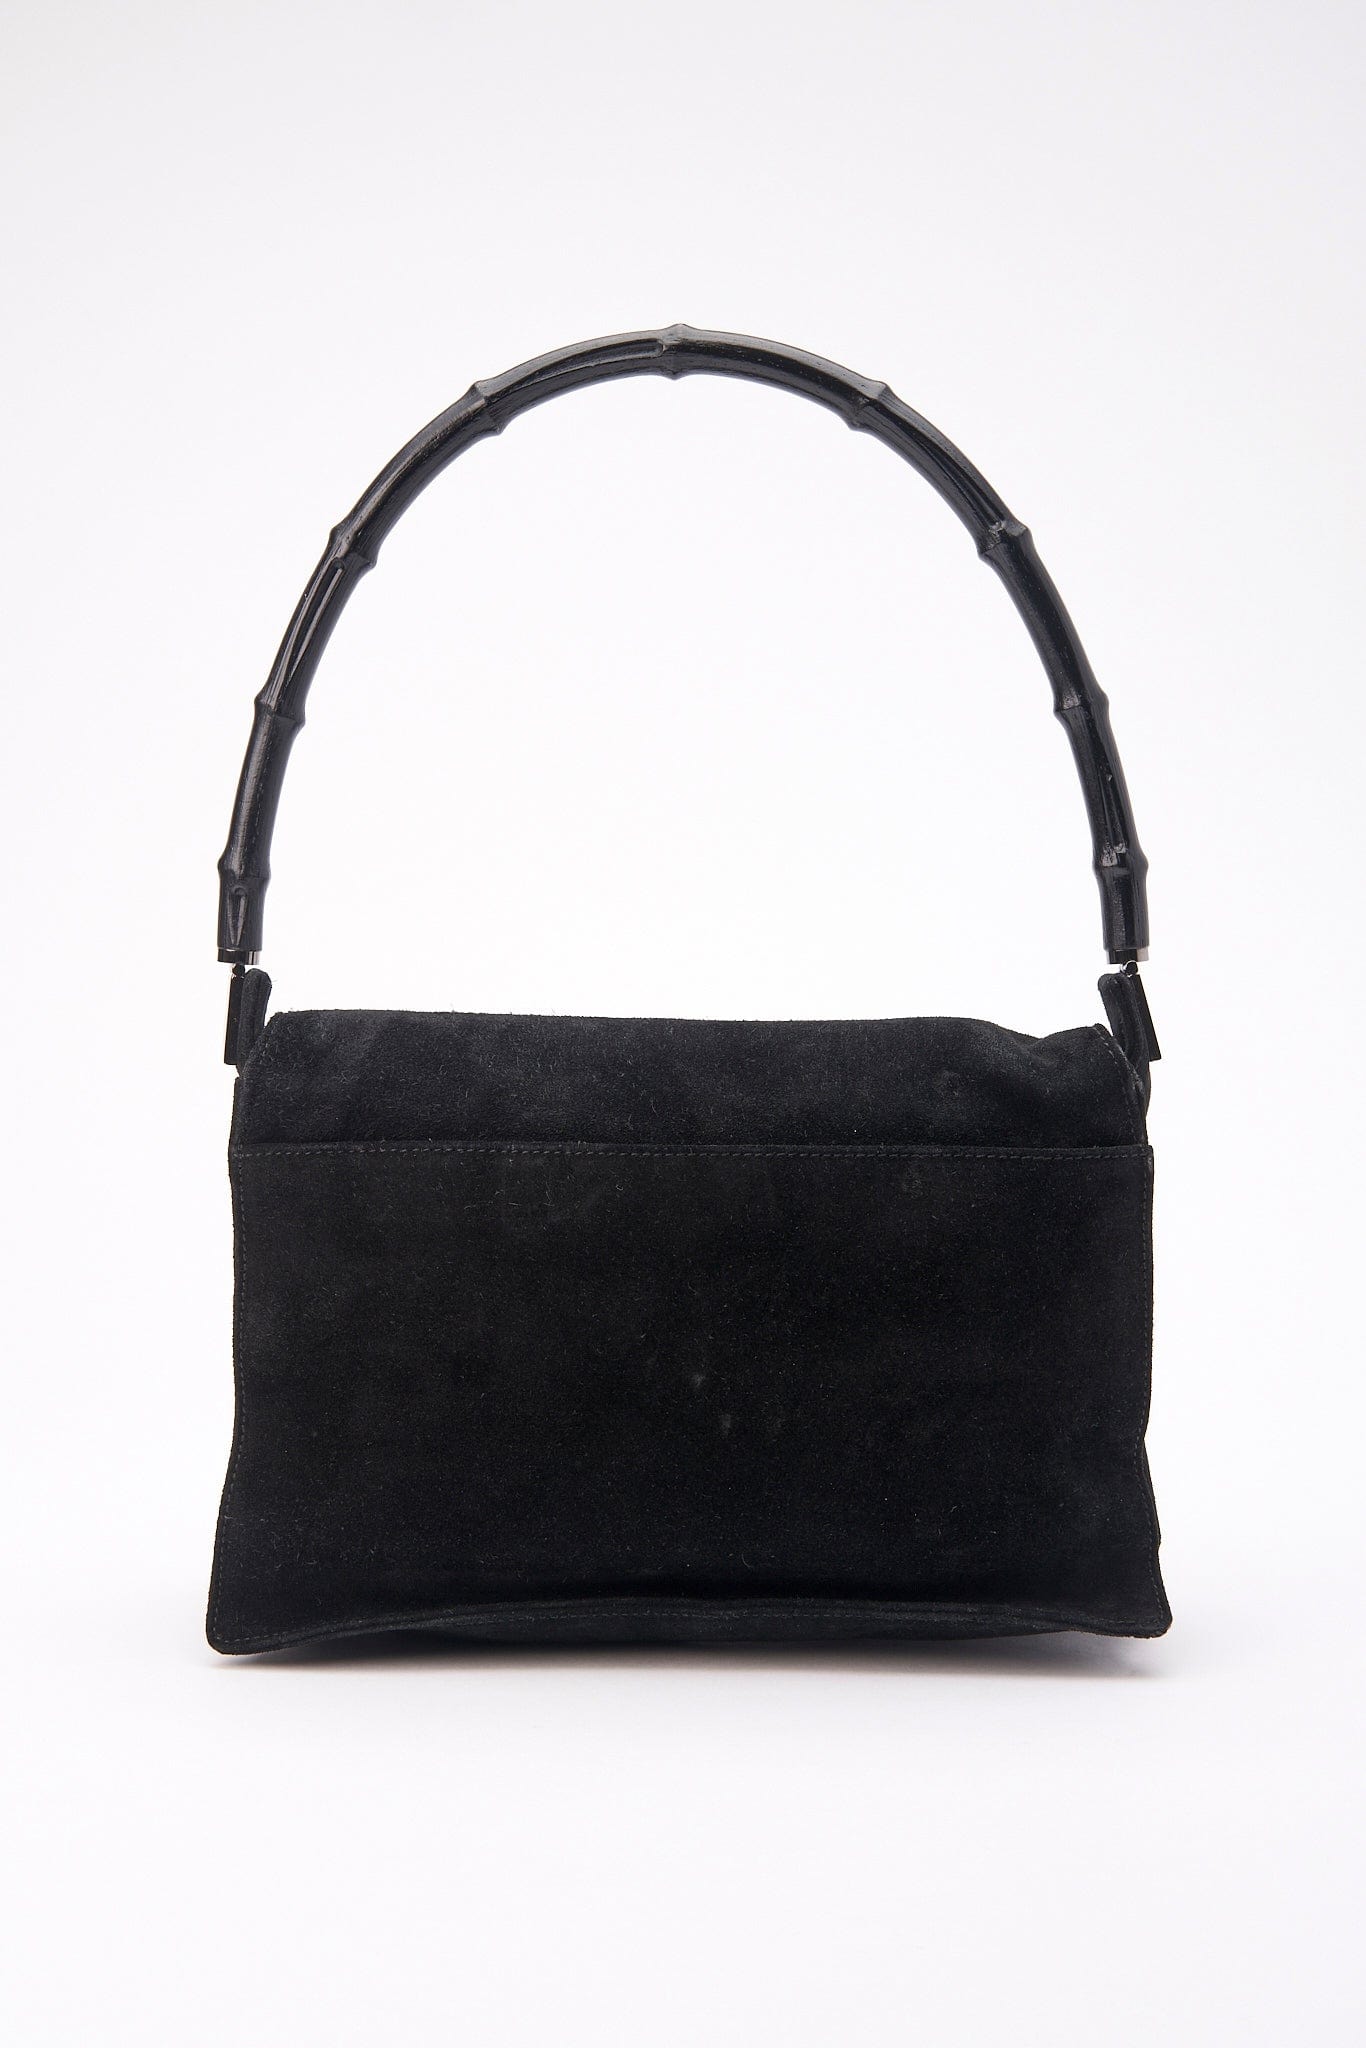 Gucci Black Suede Shoulder Bag with Bamboo handle